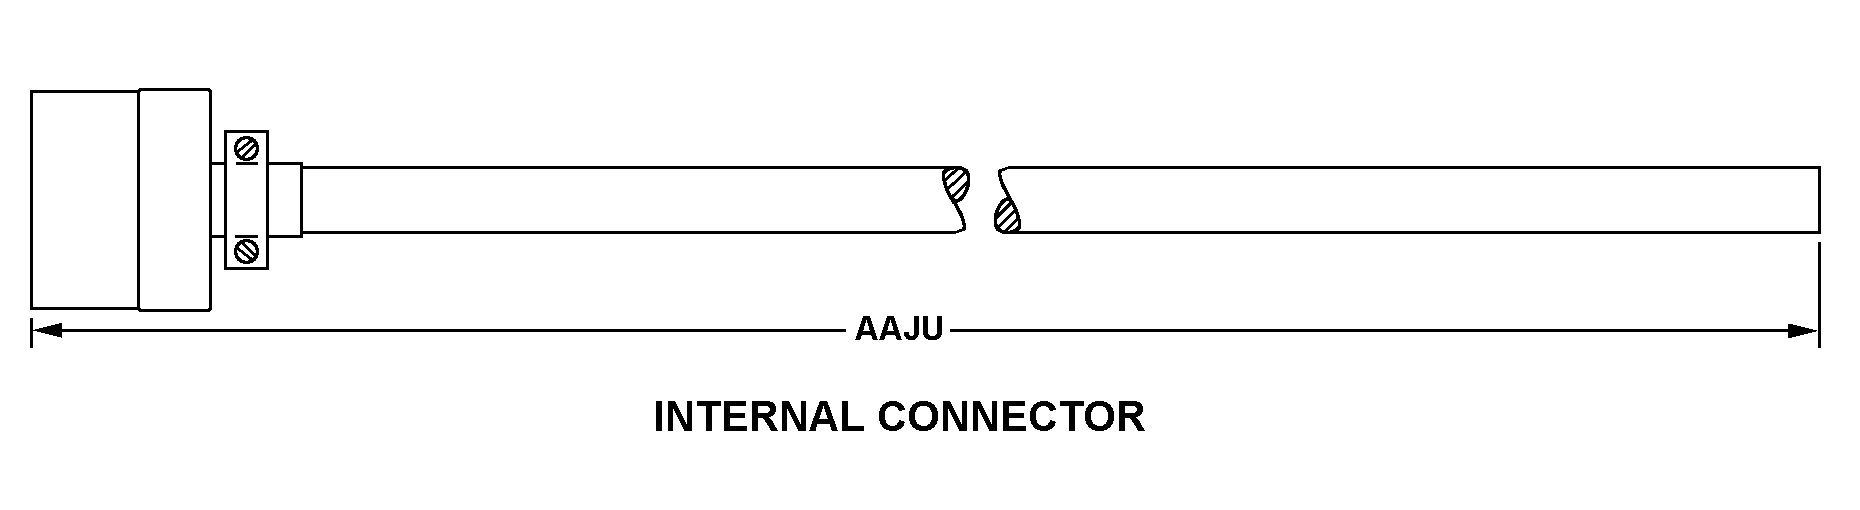 INTERNAL CONNECTOR style nsn 5995-01-357-9519